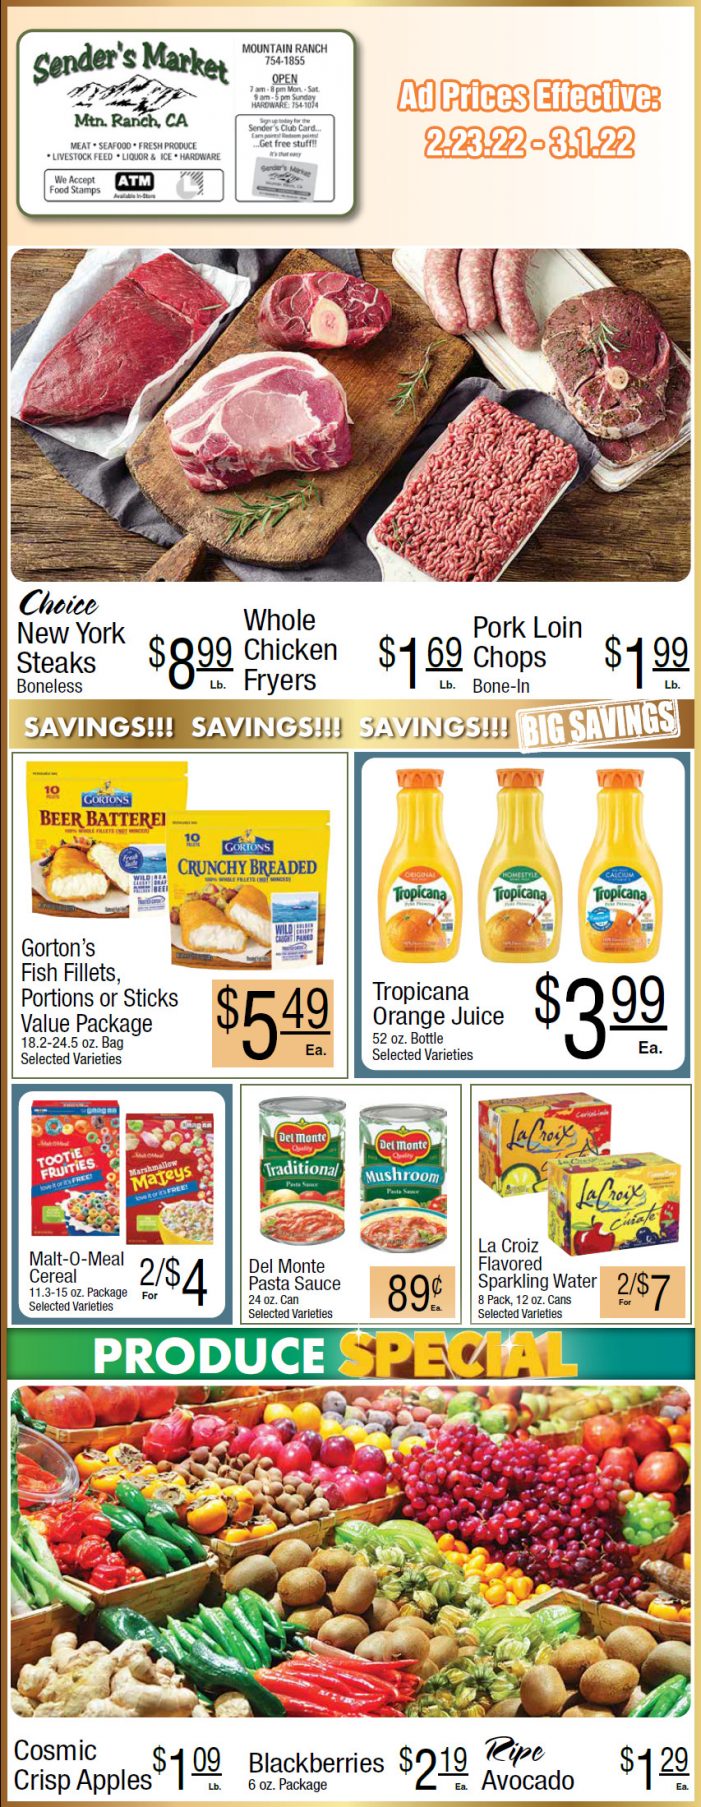 Sender’s Market’s Weekly Ad & Grocery Specials February 23rd ~ March 1st! Shop Local & Save!